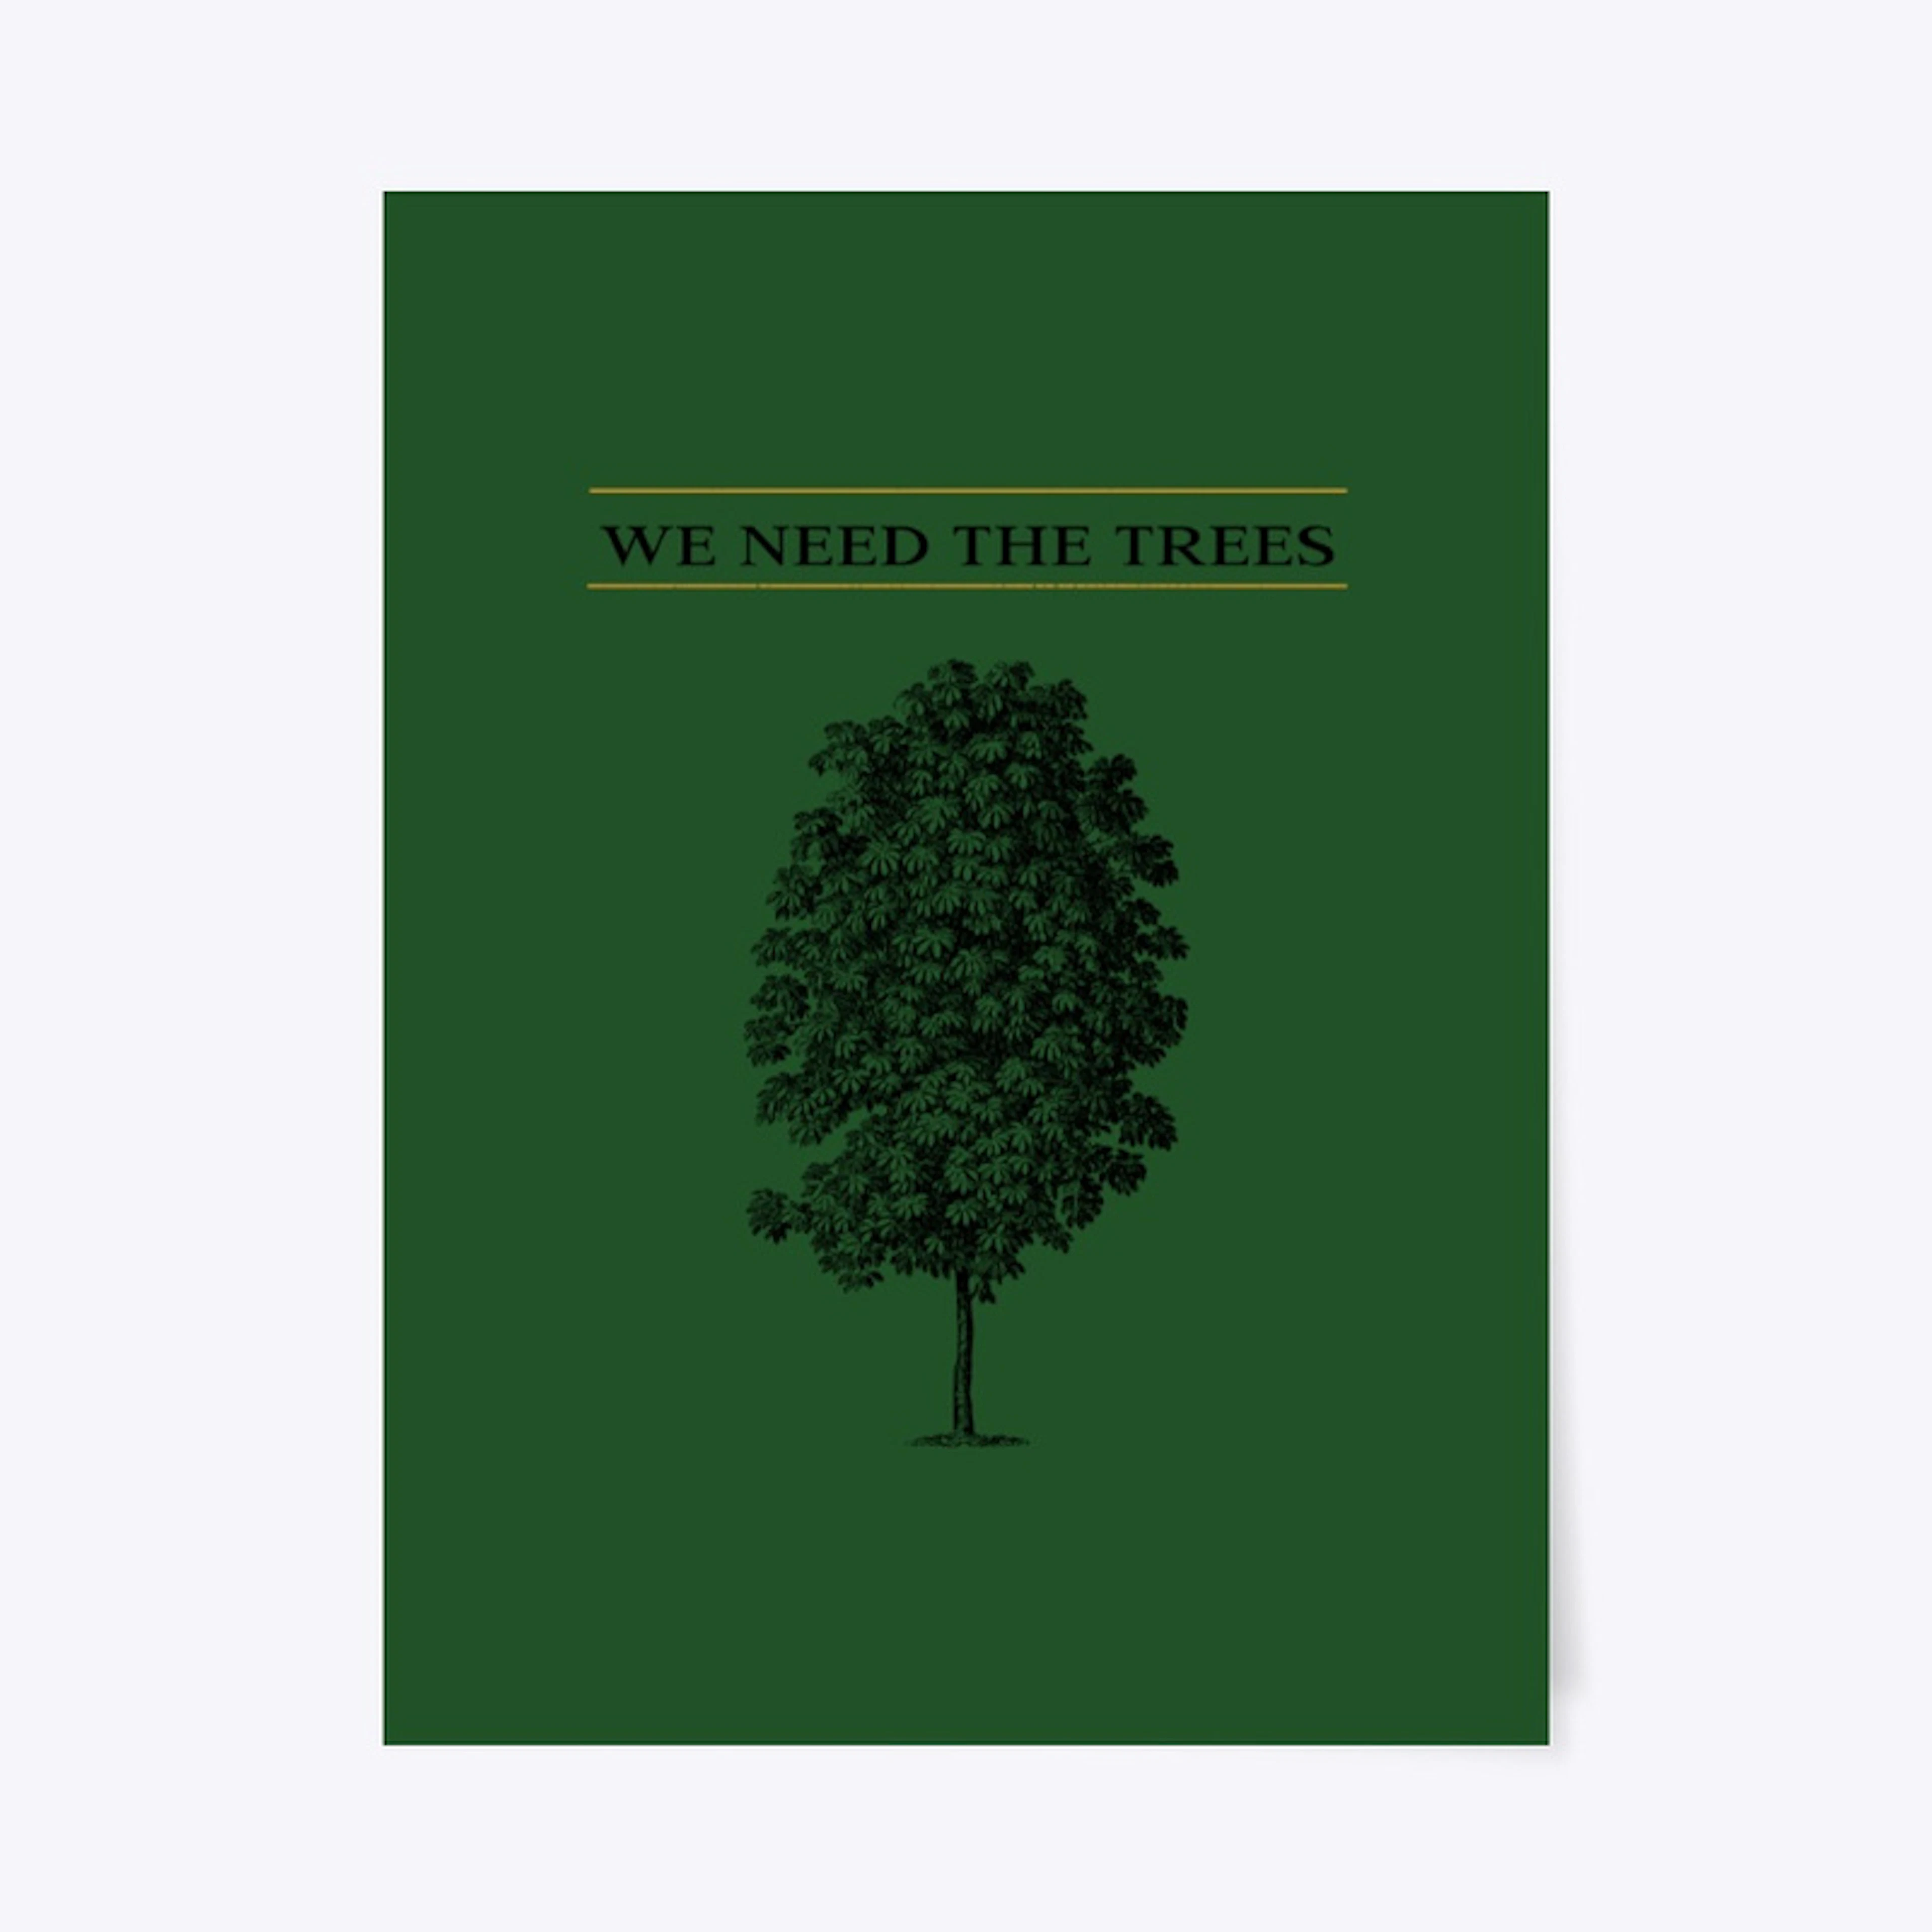 WE NEED THE TREES